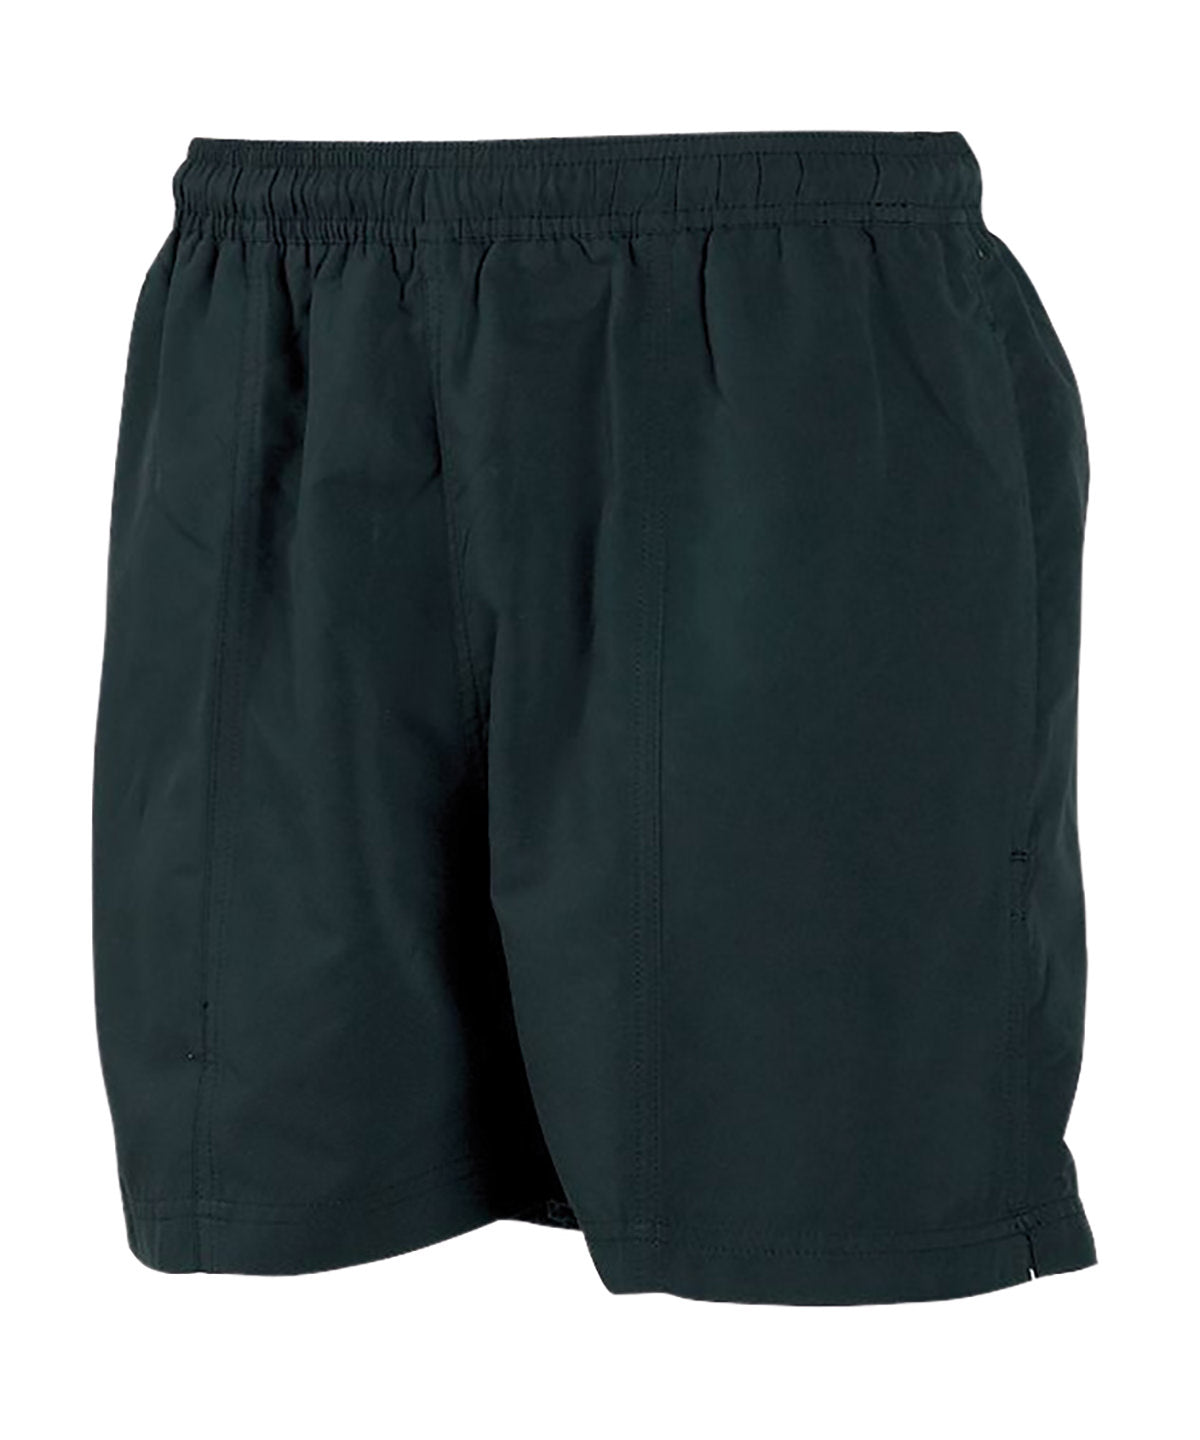 All-purpose lined shorts